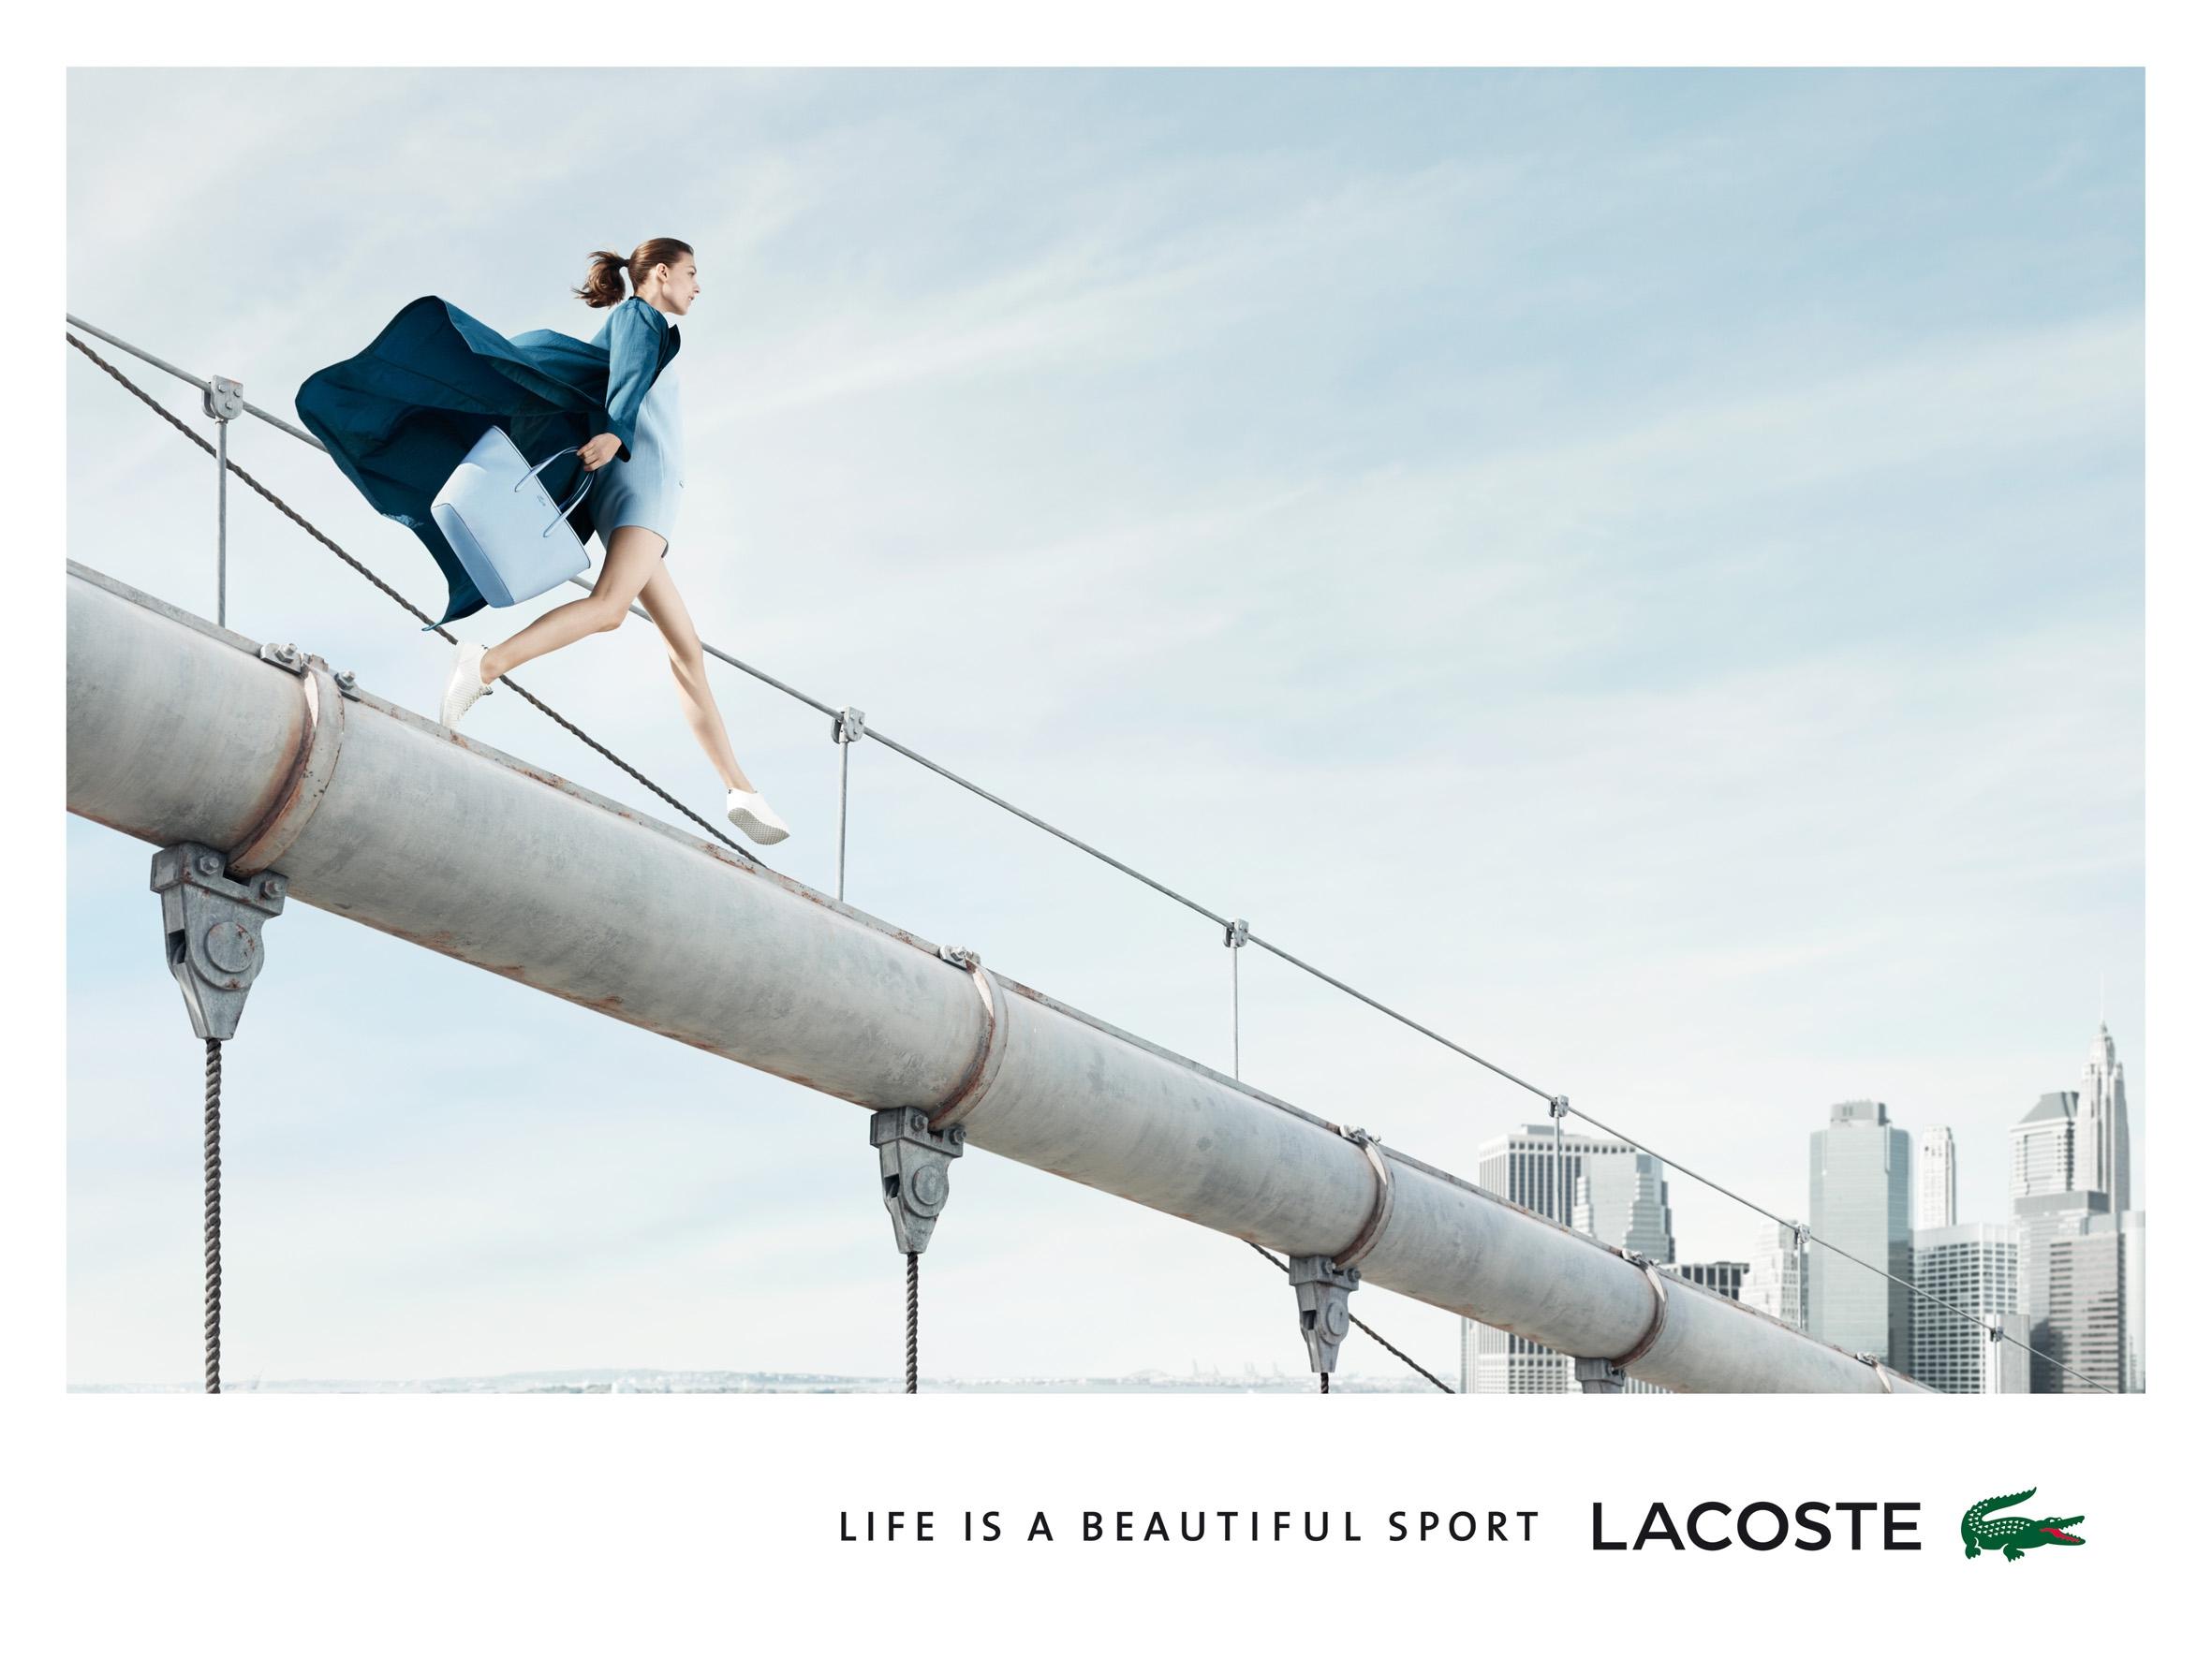 Life is a beautiful sport - Lacoste 